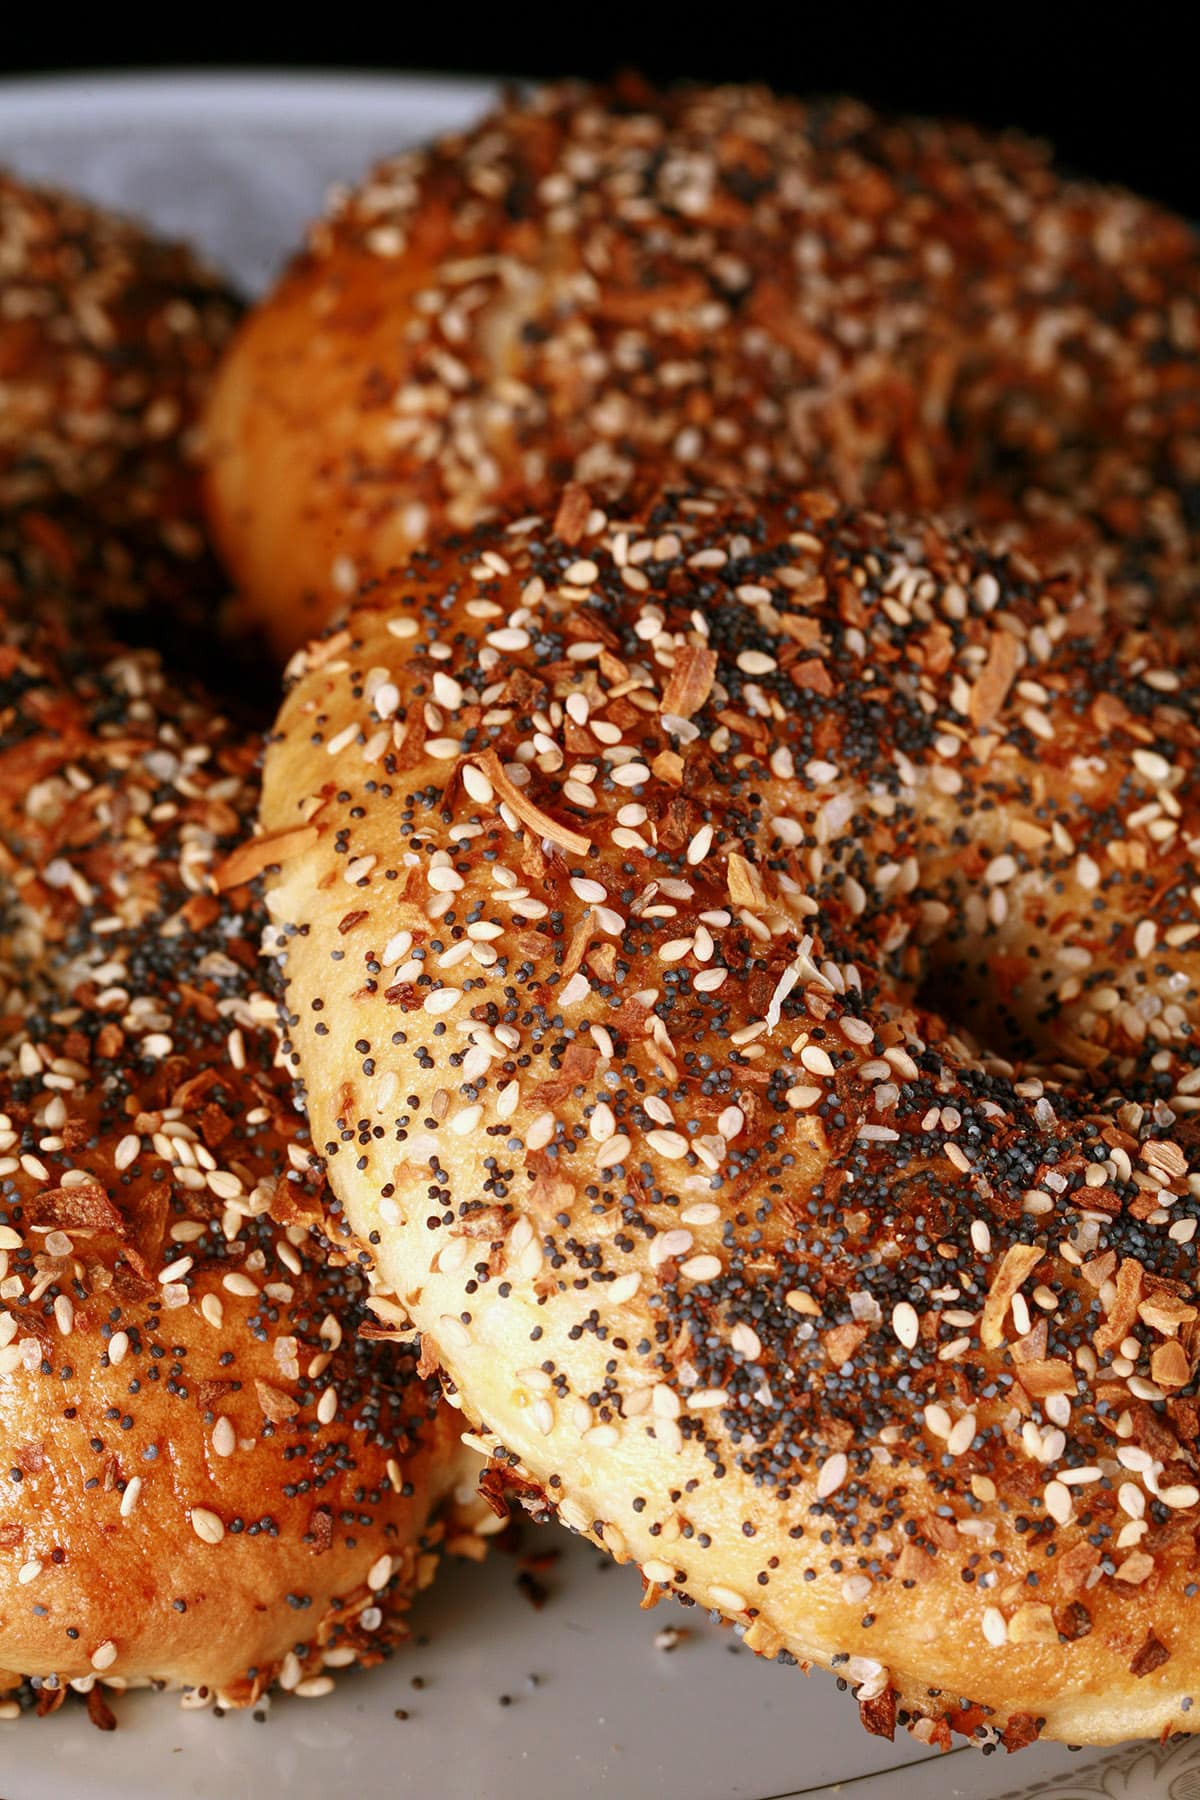 A plate of homemade everything seasoned bagels.